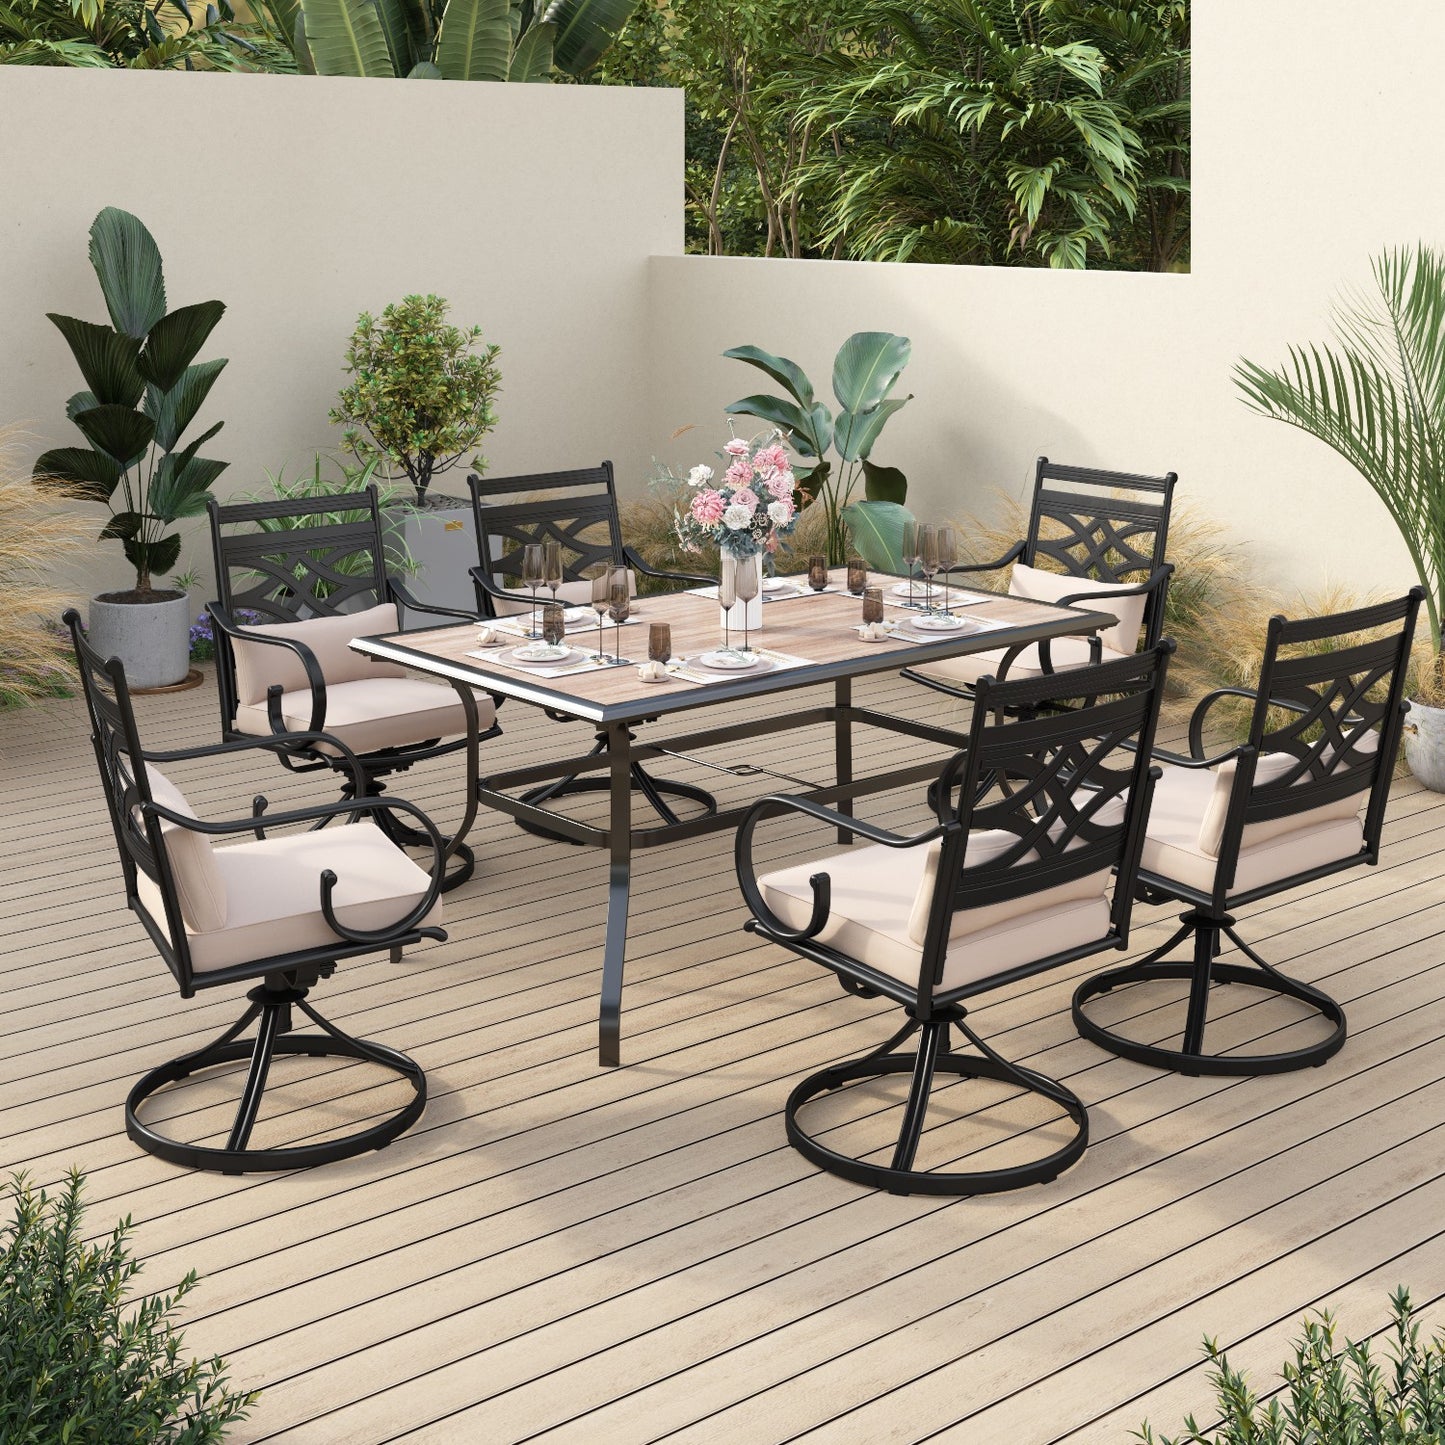 Sophia&William 7-Piece Outdoor Patio Dining Set Cushioned Swivel Chairs and Steel Table